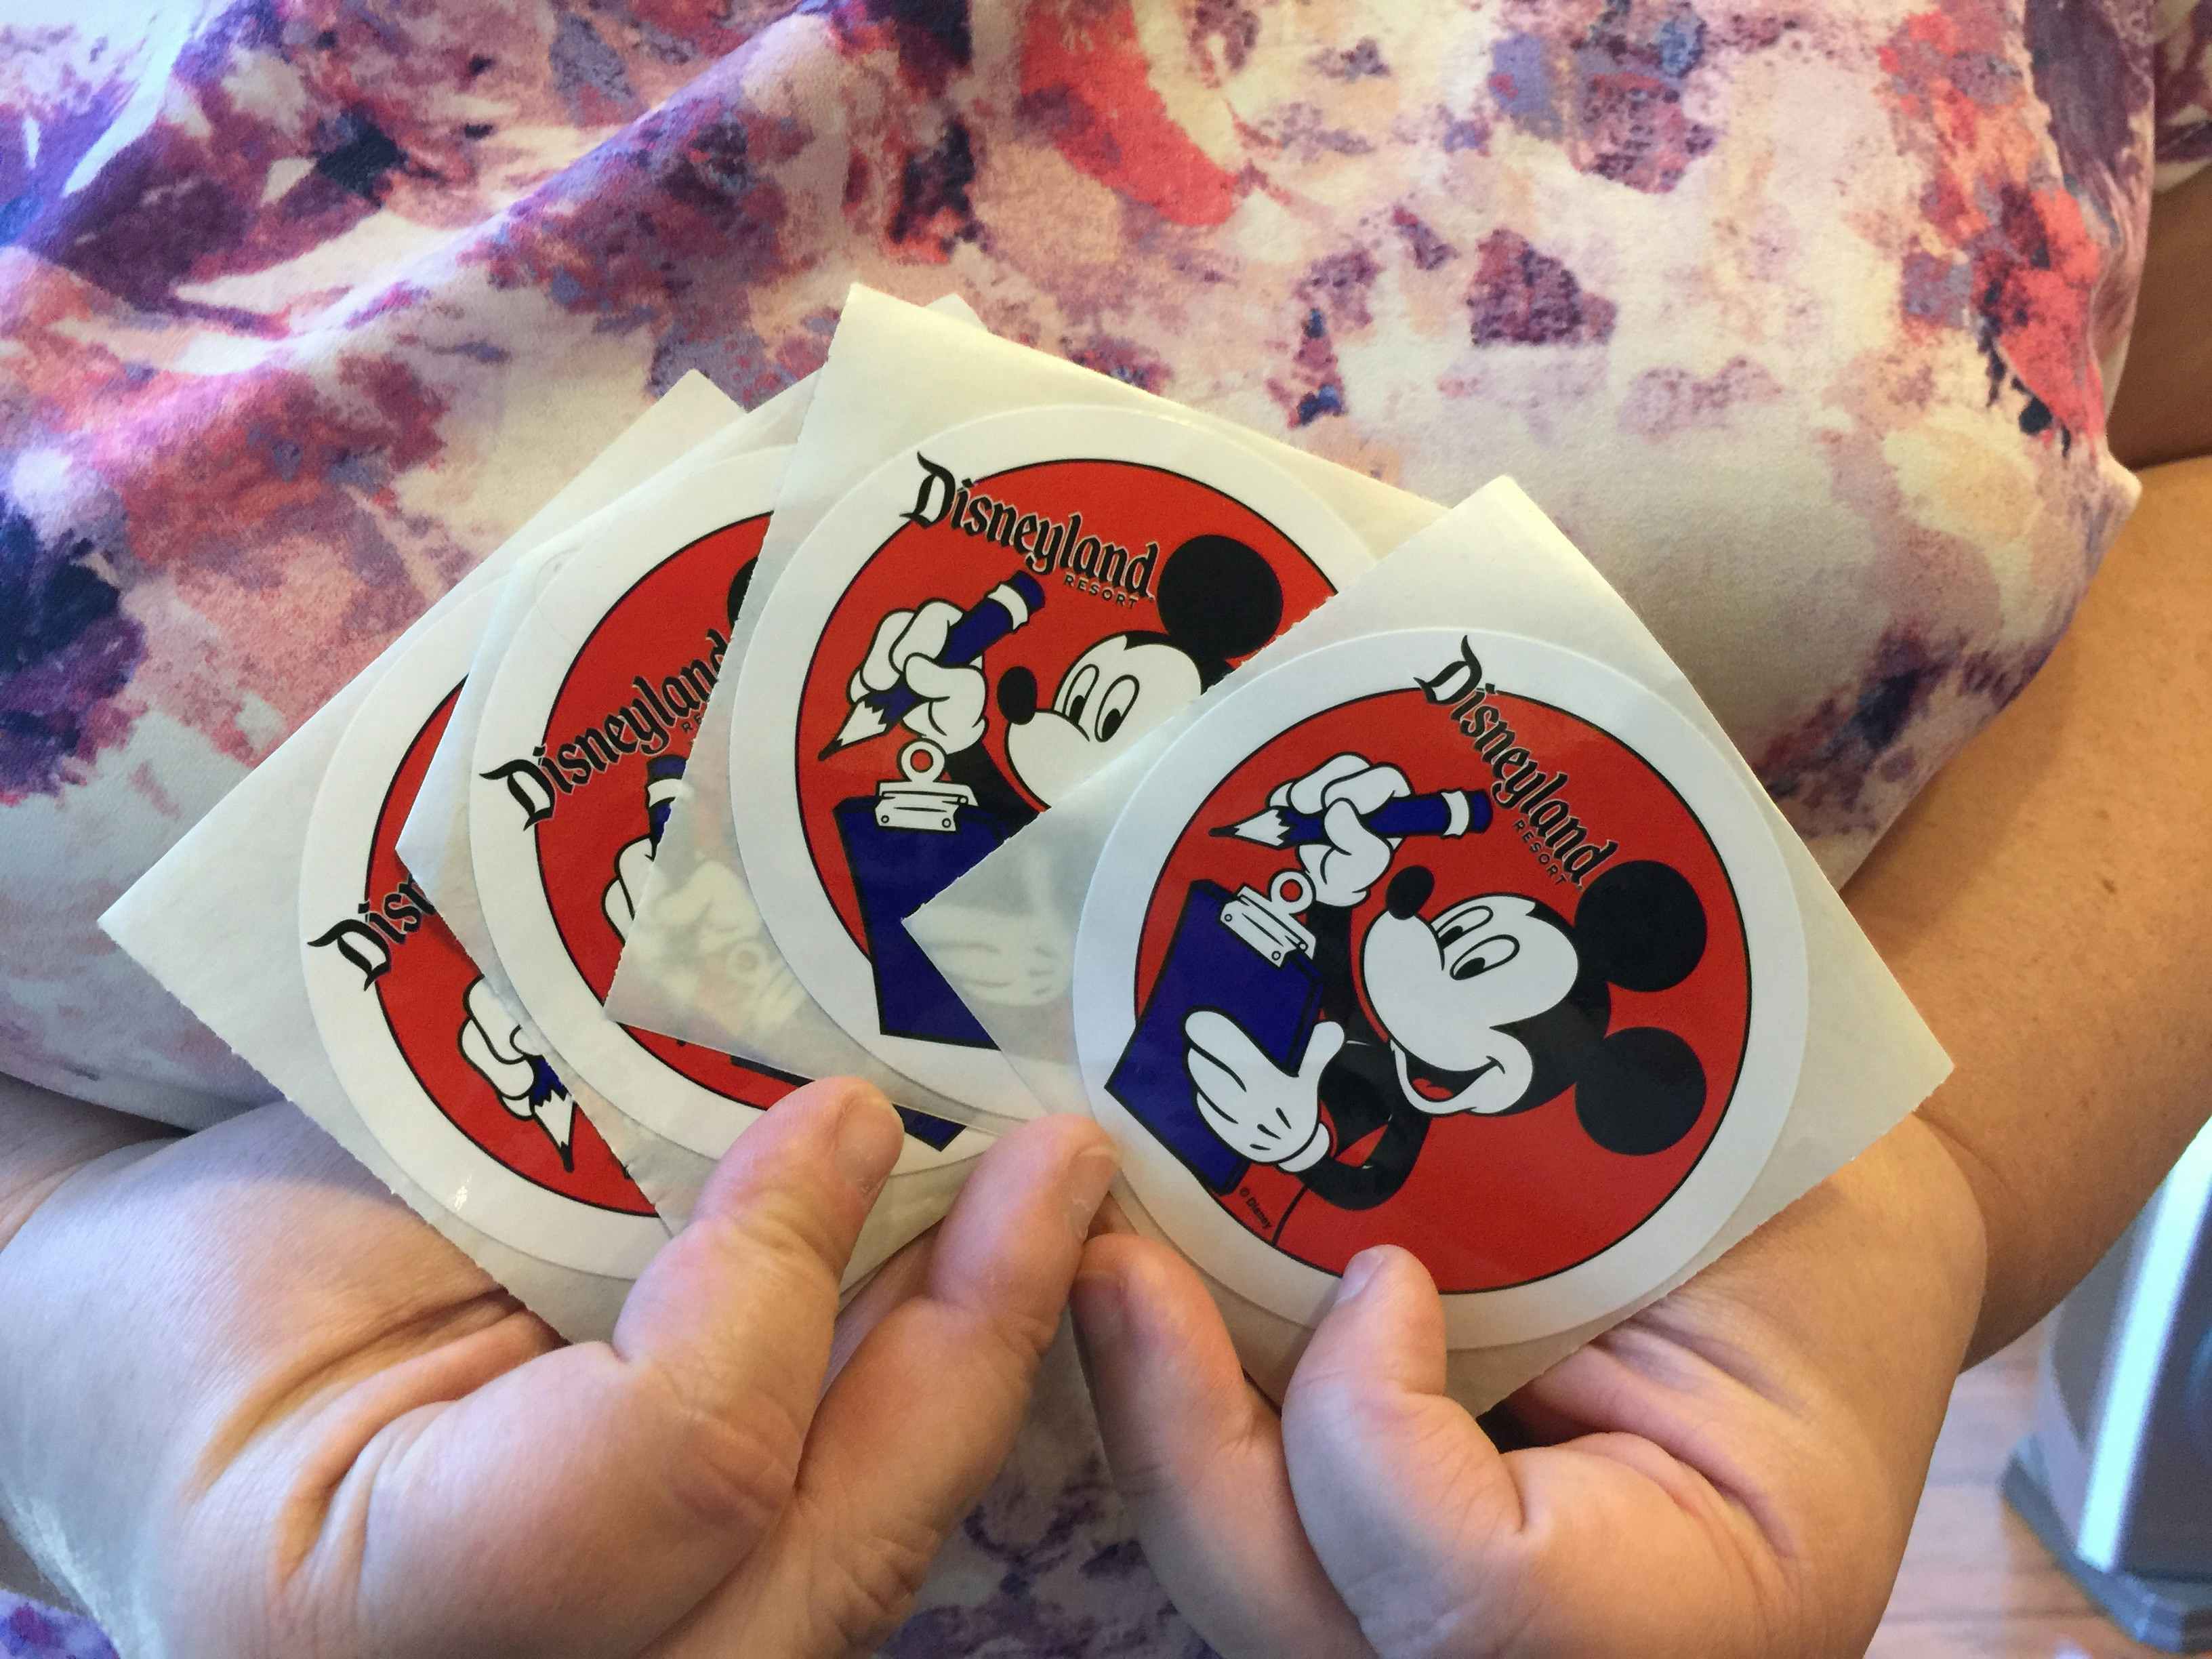 Someone showing off four Disneyland stickers with Mickey Mouse on them.